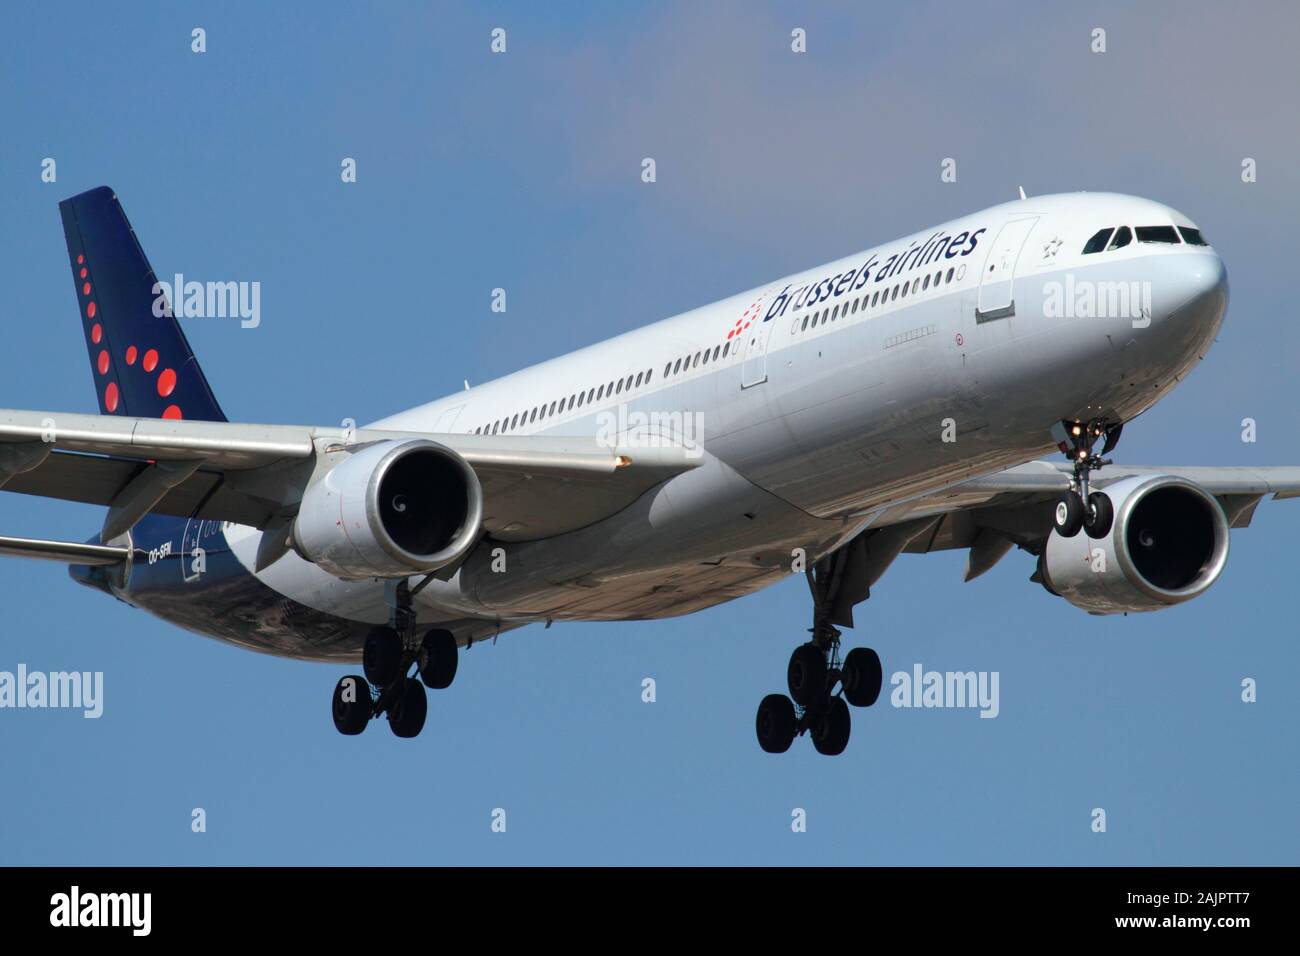 Brussels Airlines Airbus A330-300 widebody long haul passenger jet aeroplane on approach. Close-up view from the front quarter. Civil aviation. Stock Photo